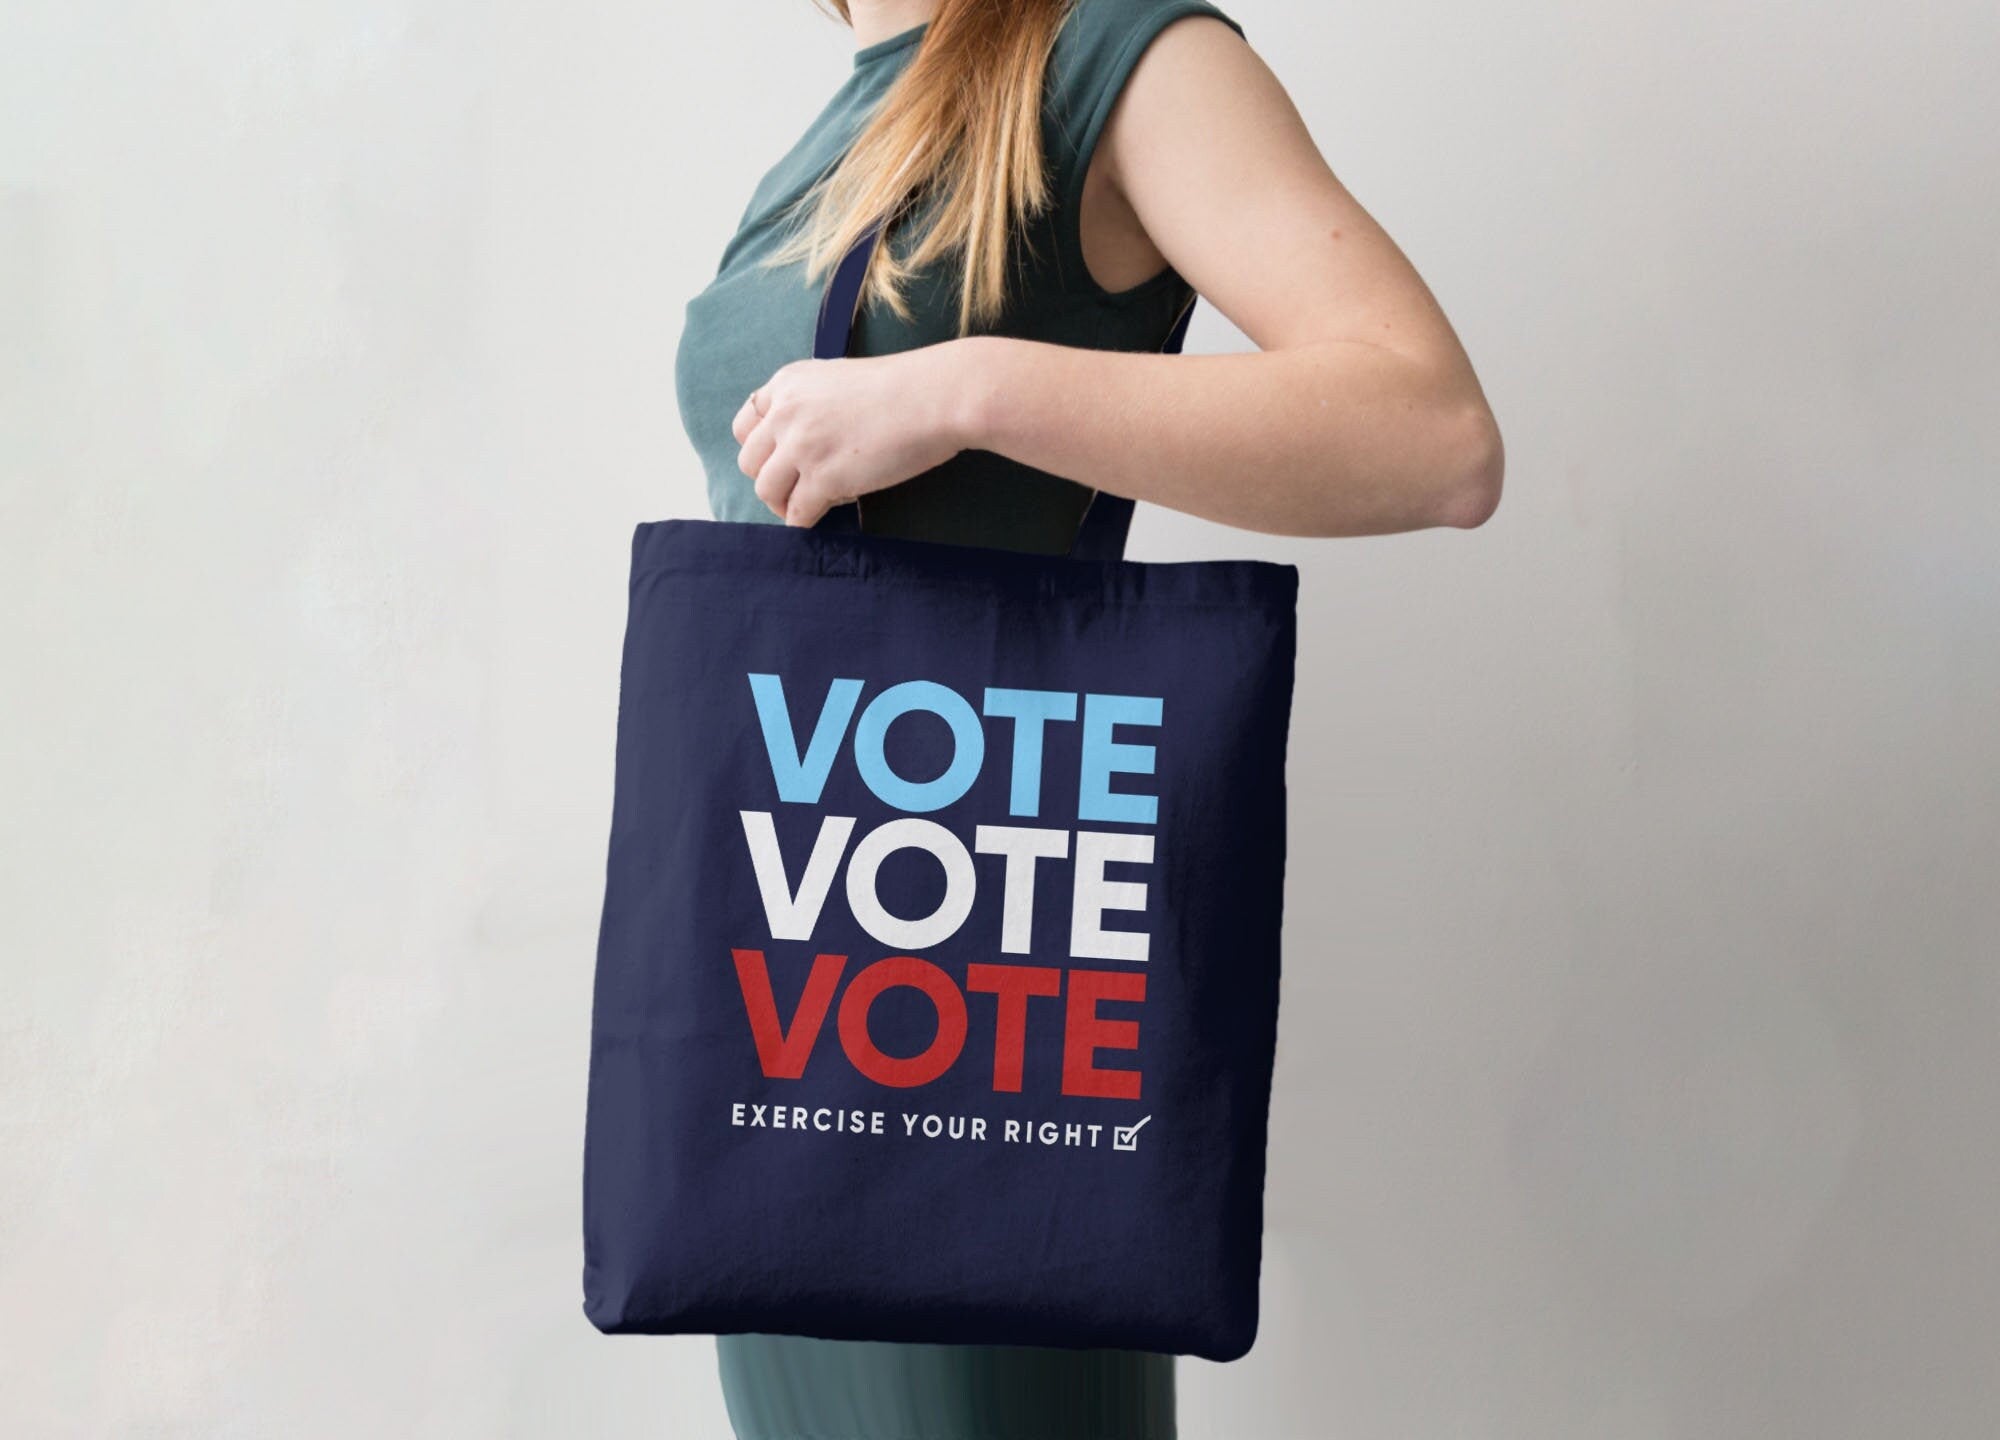 Vote Tote Bag for Women | 2021 Election Item, Tote Bag Navy Blue by BootsTees